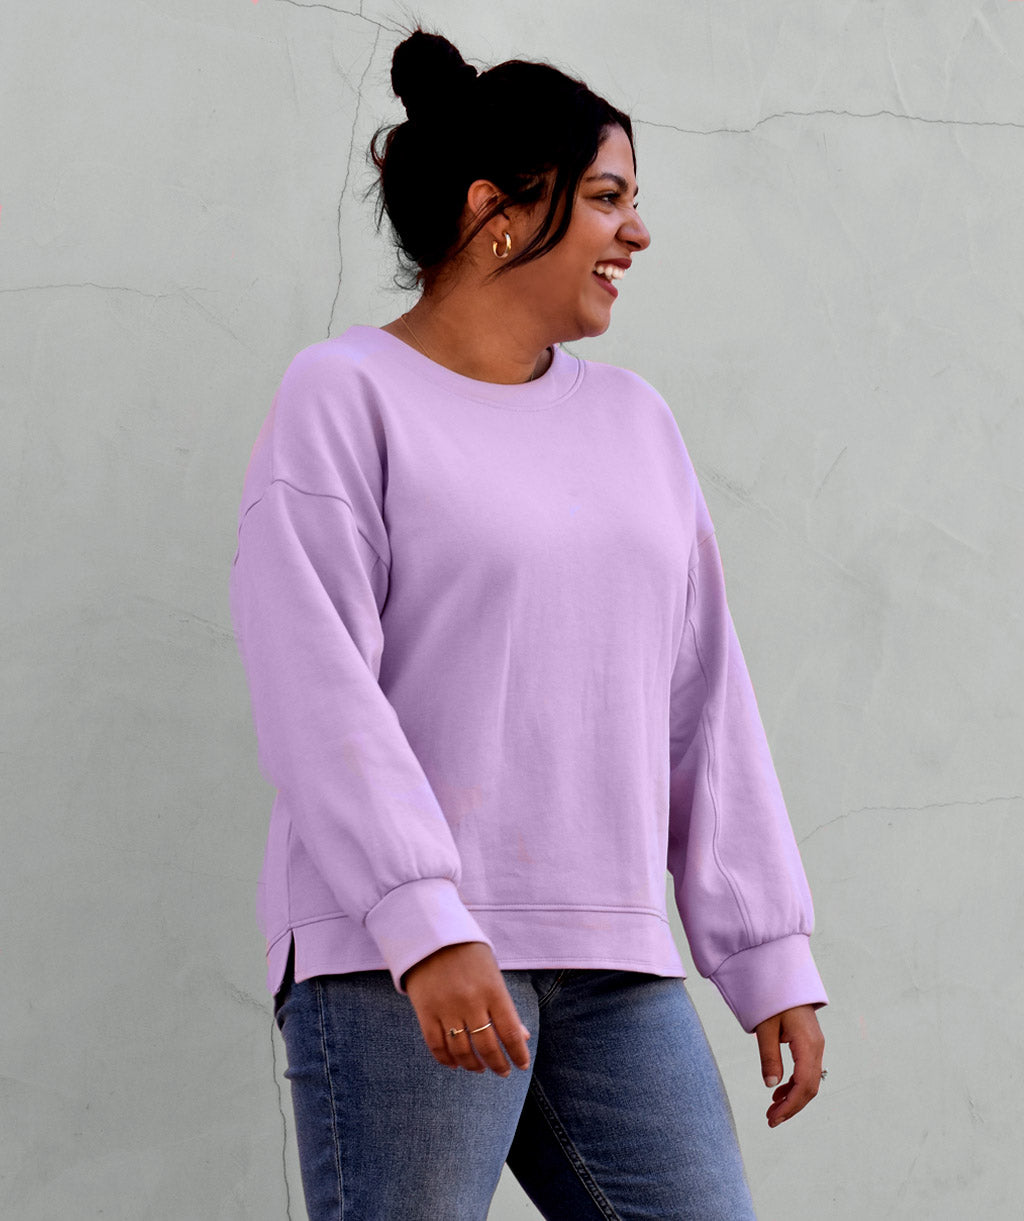 LORISSA double knit top in Pastel Orchid